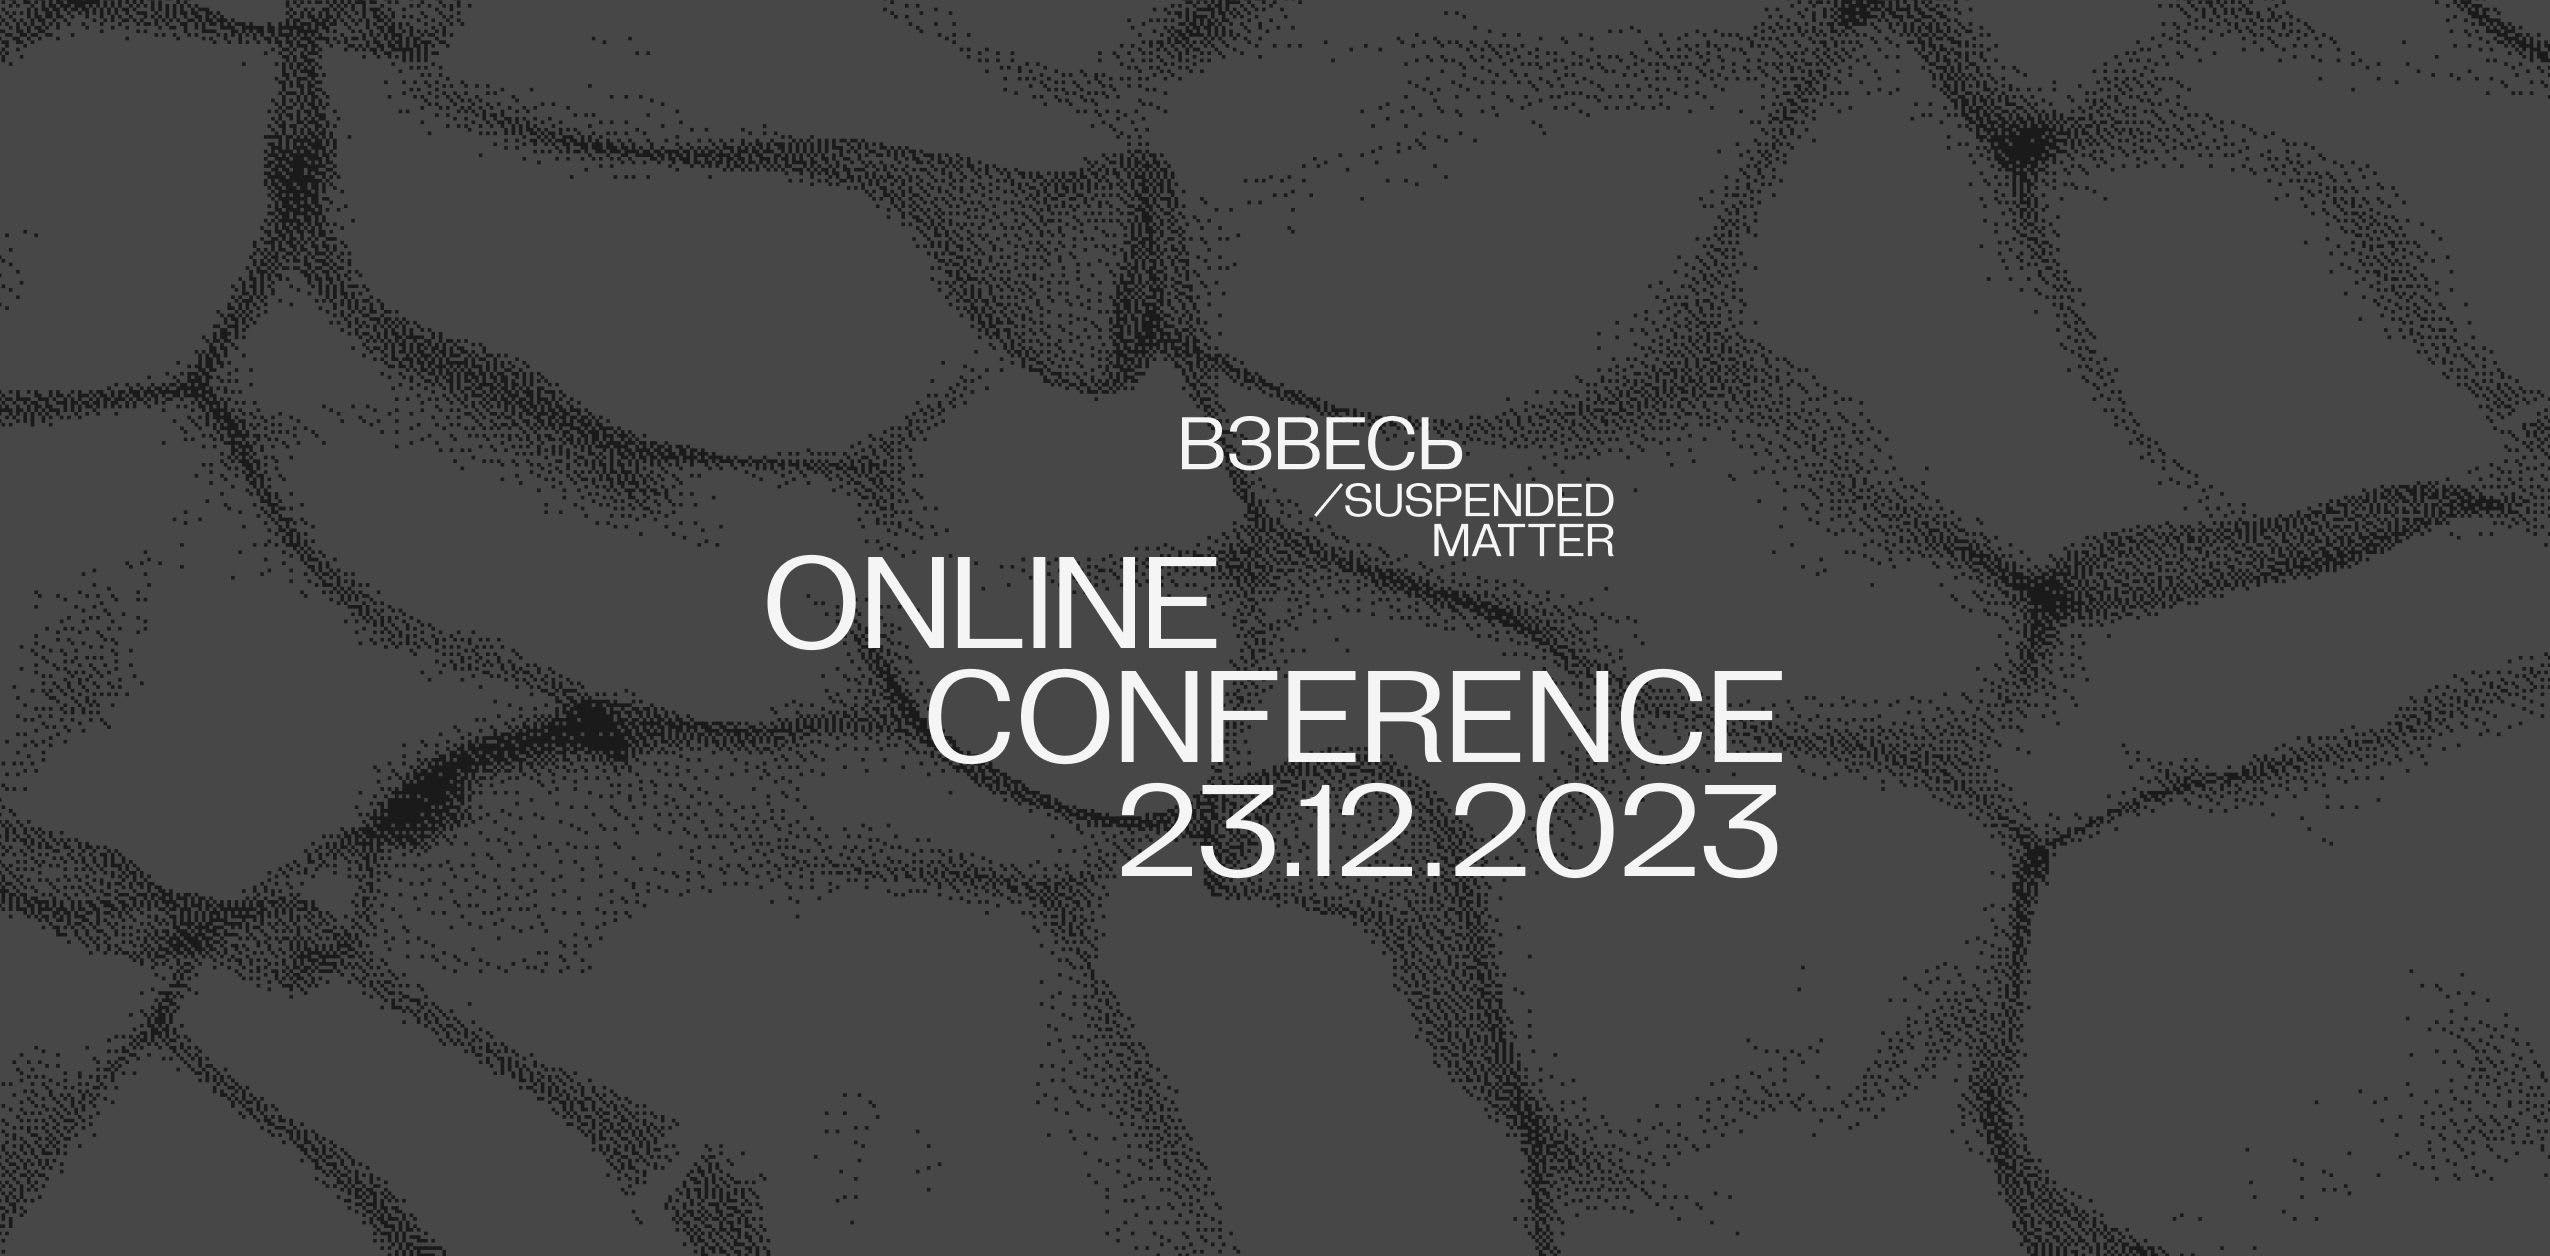 Online public conference ВЗВЕСЬ / Suspended Matter as a resulting event of the research group